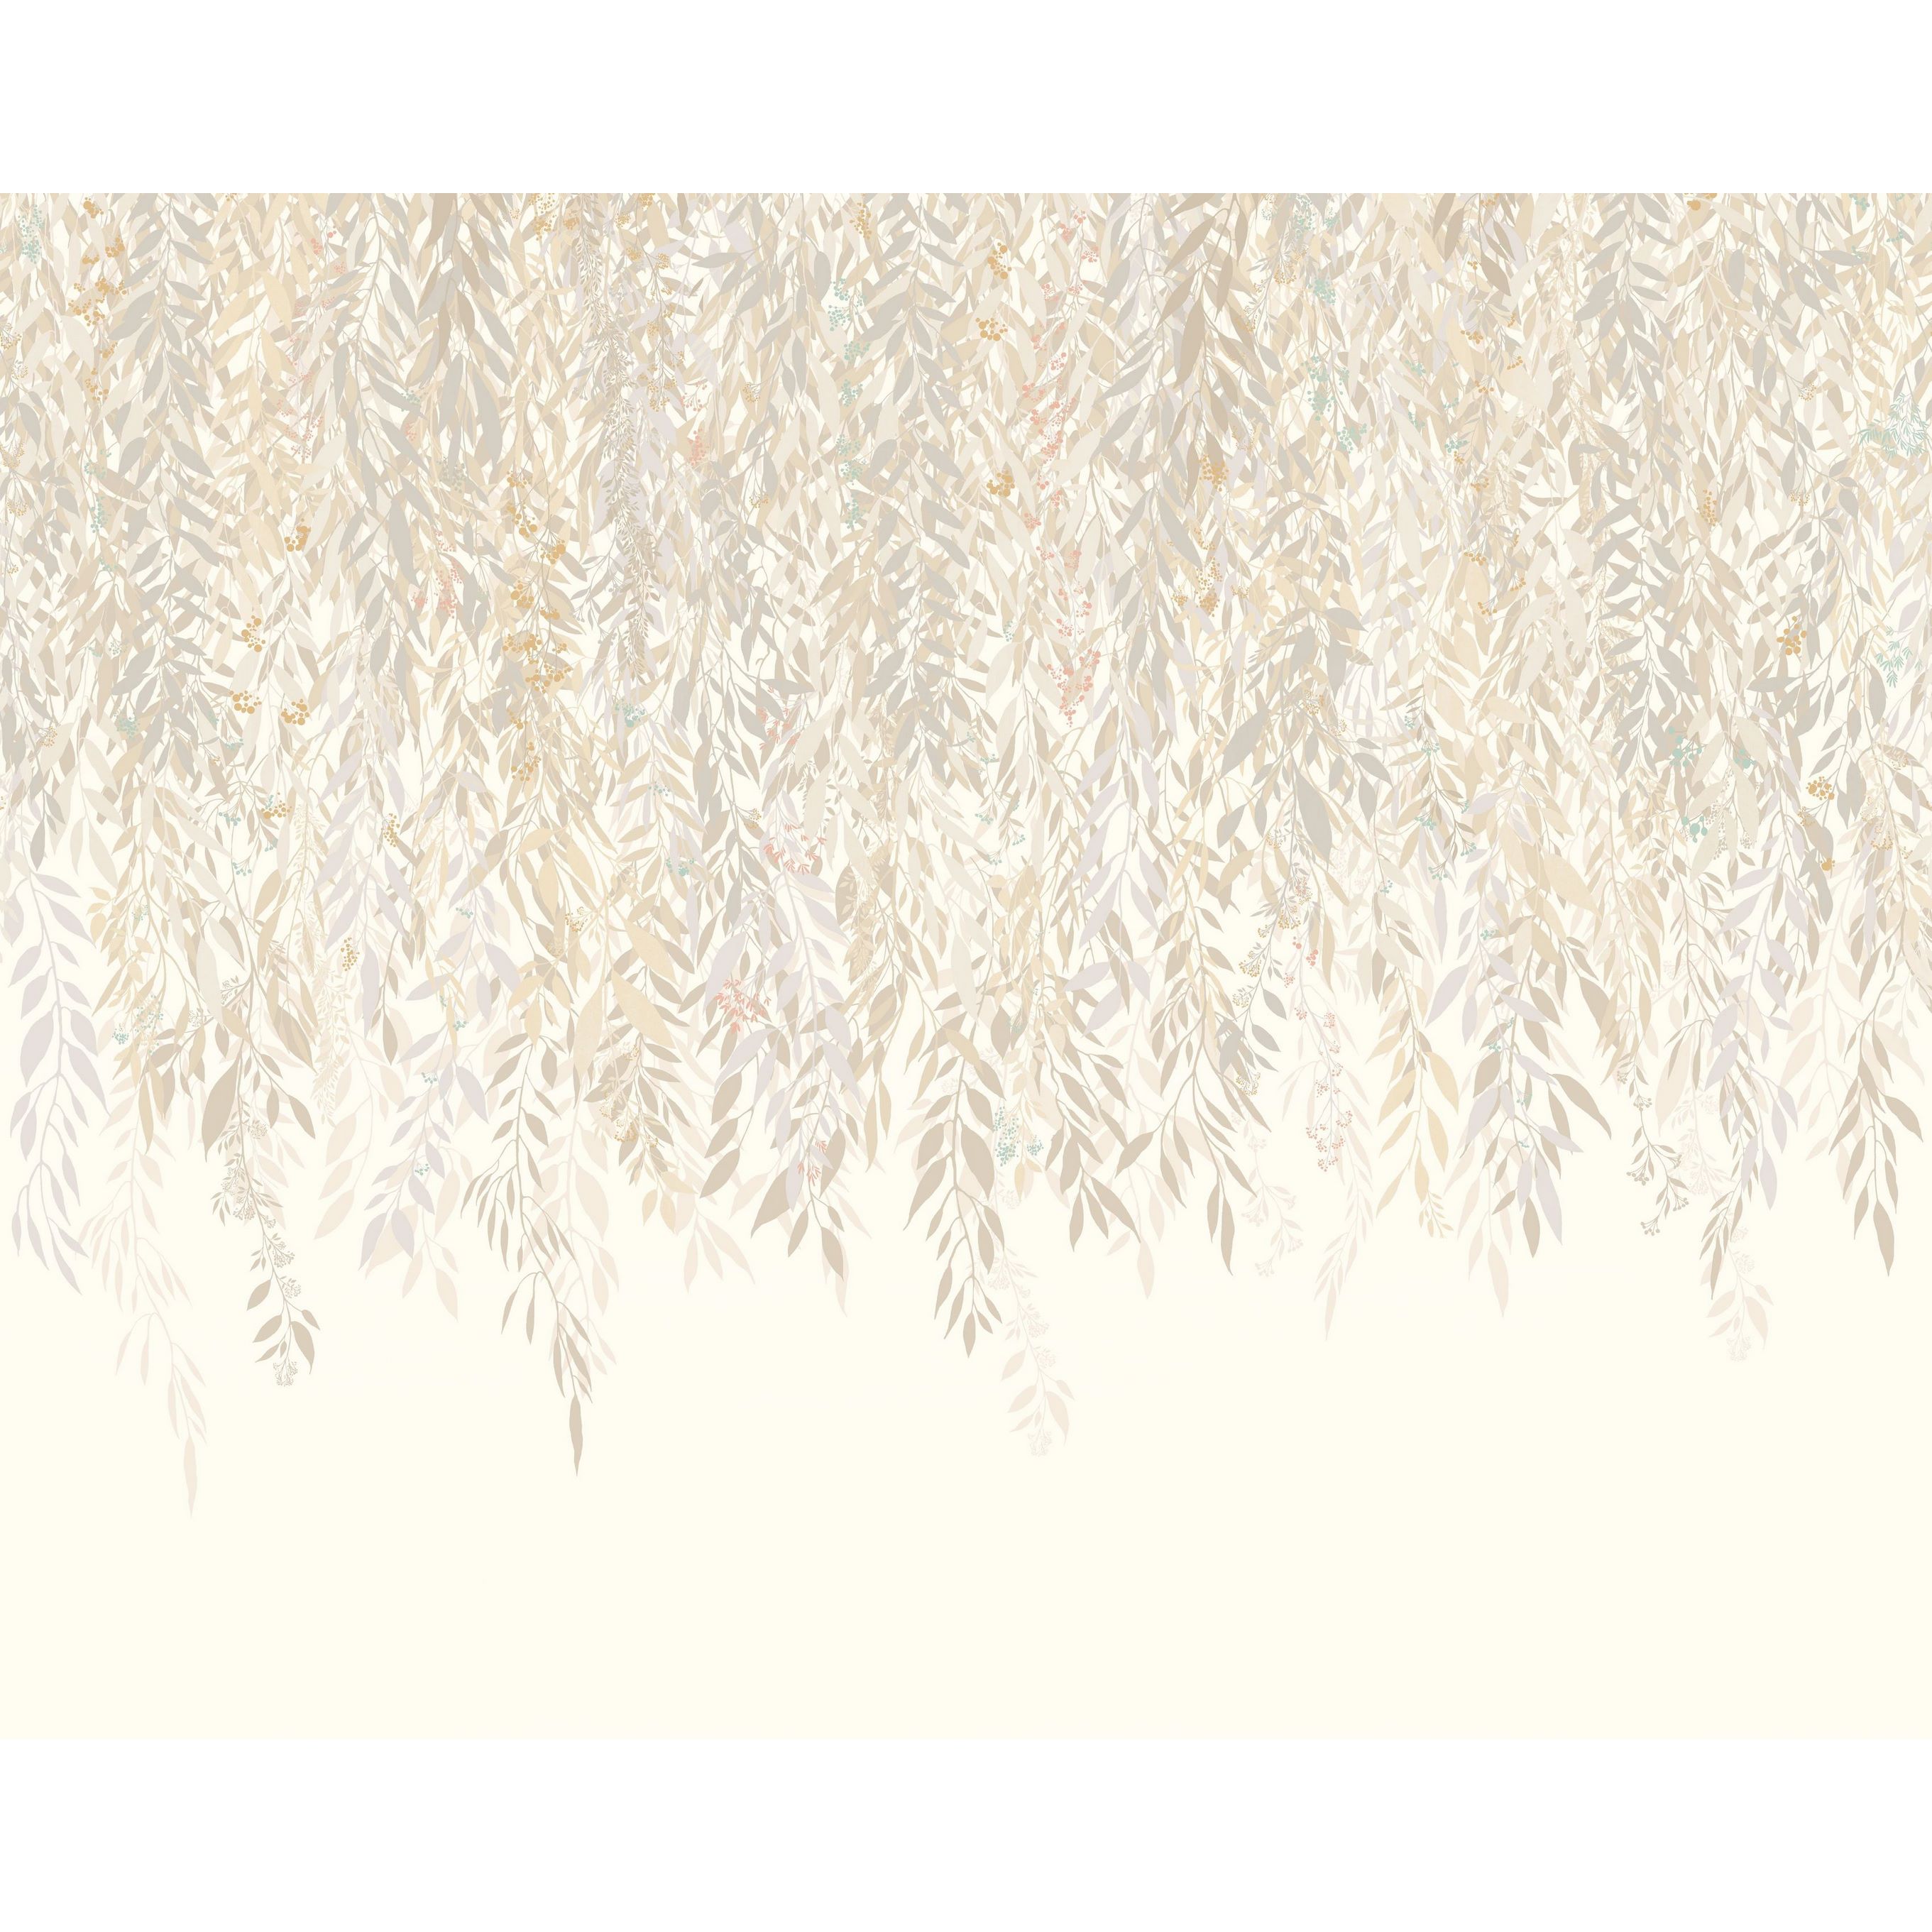 Cascading Willow Parchment IKA50135M